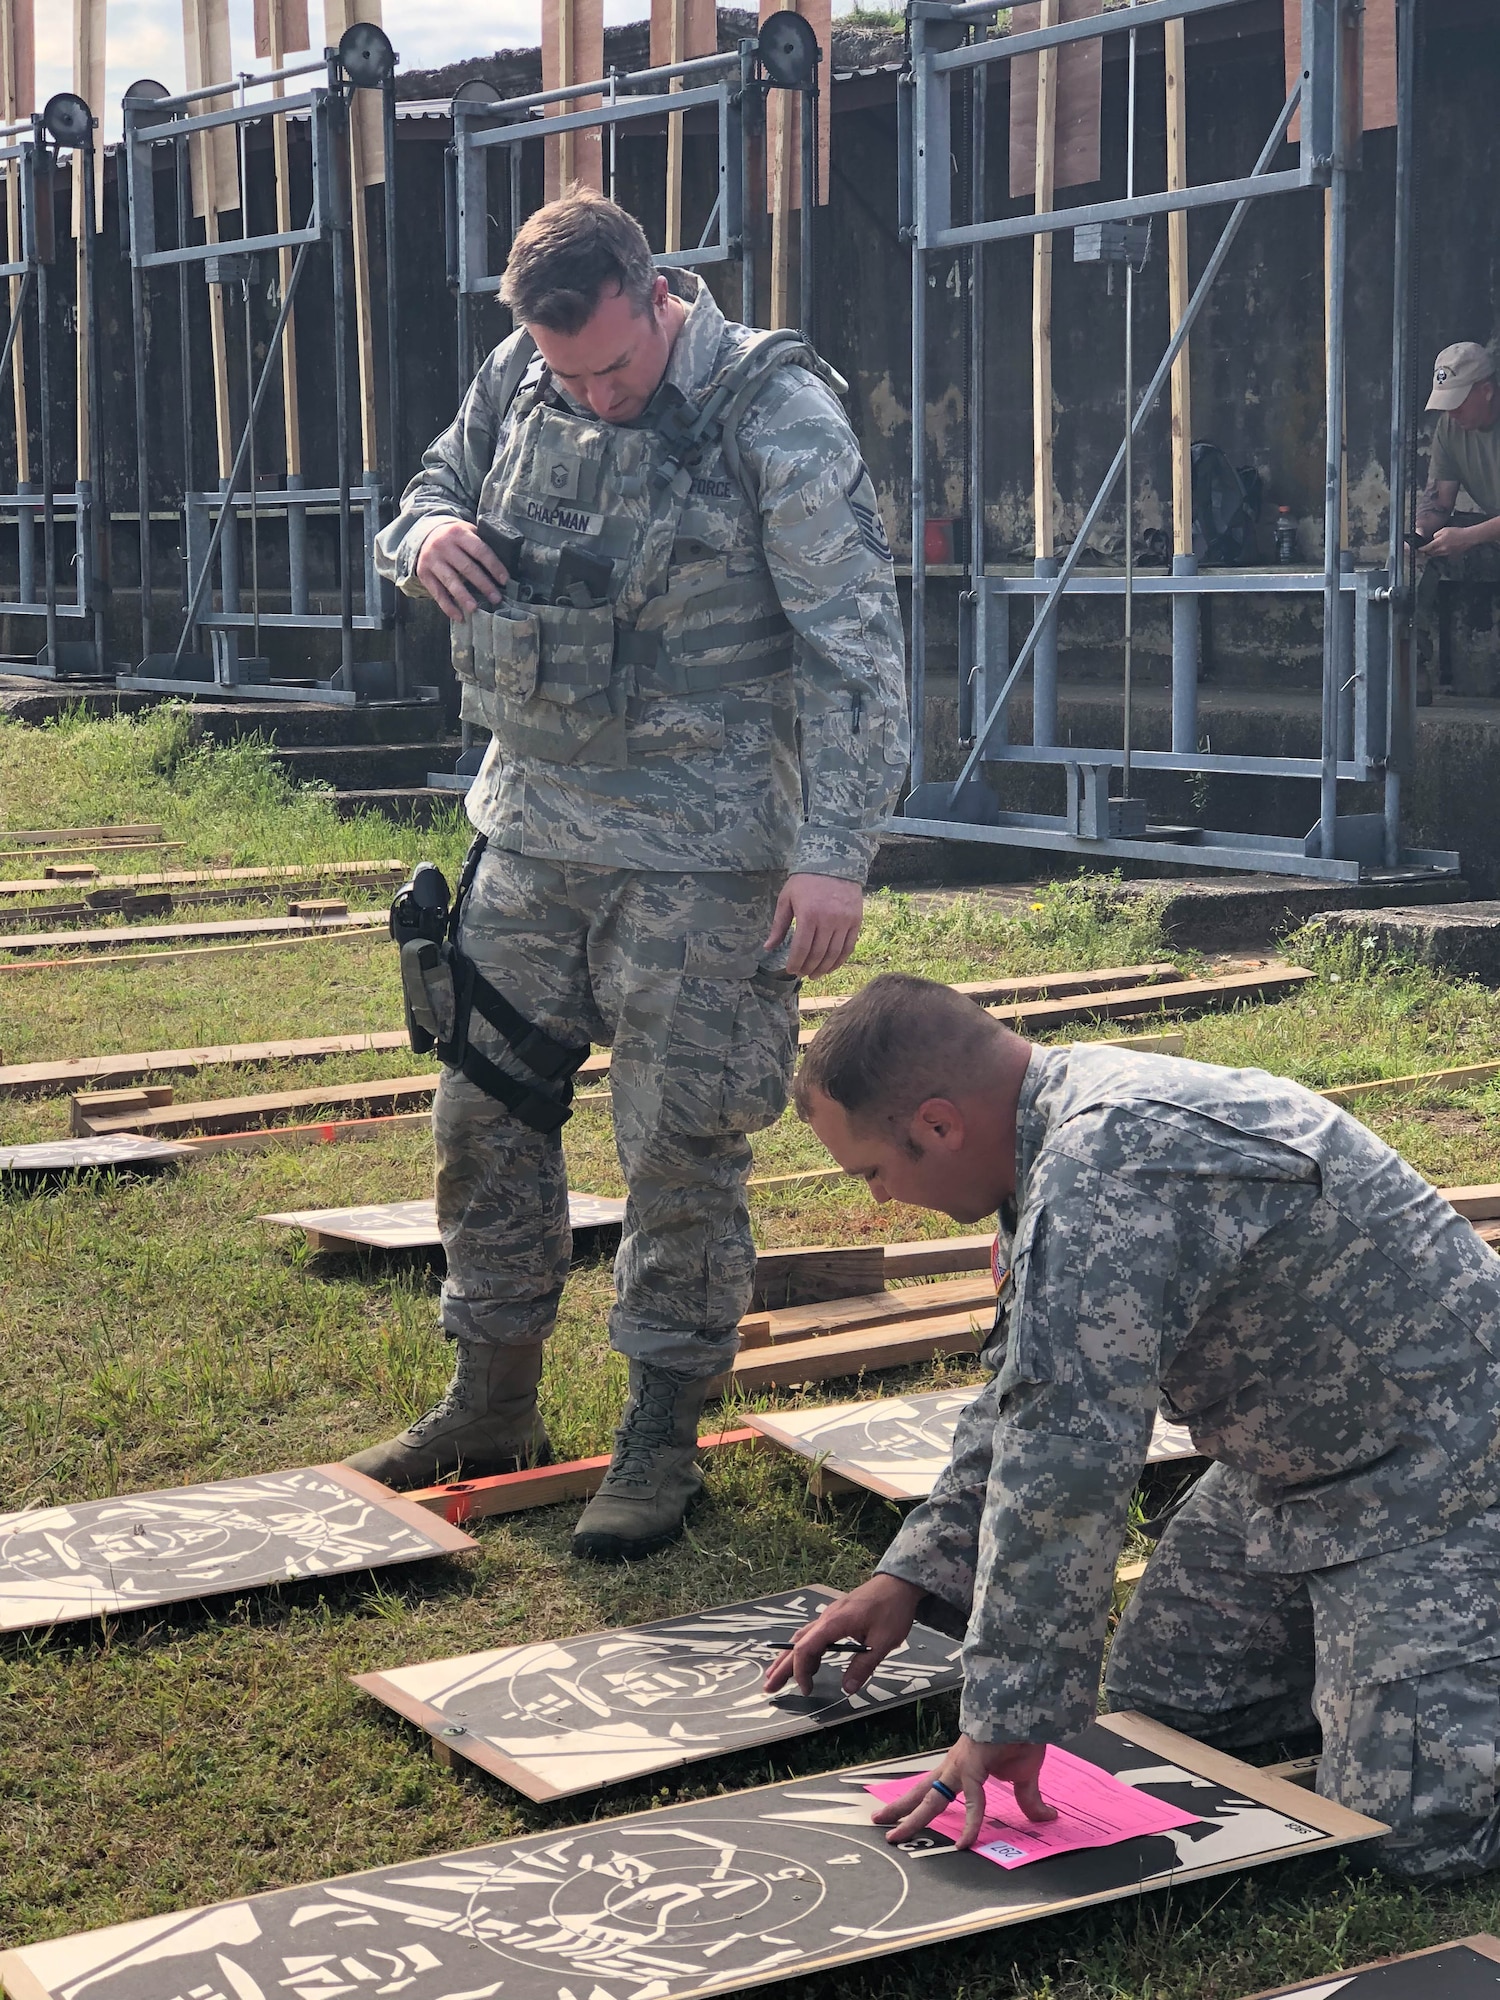 Master Sgt. Michael Chapman, 194th Security Forces Squadron, verifies scores with Army personnel during the 47th Annual Winston P. Wilson Championship, Robinson Maneuver Training Center, Arkansas, May 1, 2018.  The annual events, hosted by the National Guard Marksmanship Training Center April 29-May 4, 2018, offer Servicemembers from the National Guard and international community an opportunity to test marksmanship skills in a battle-focused environment. (U.S. Air National Guard photo by Staff Sgt. Hope Funderburk)